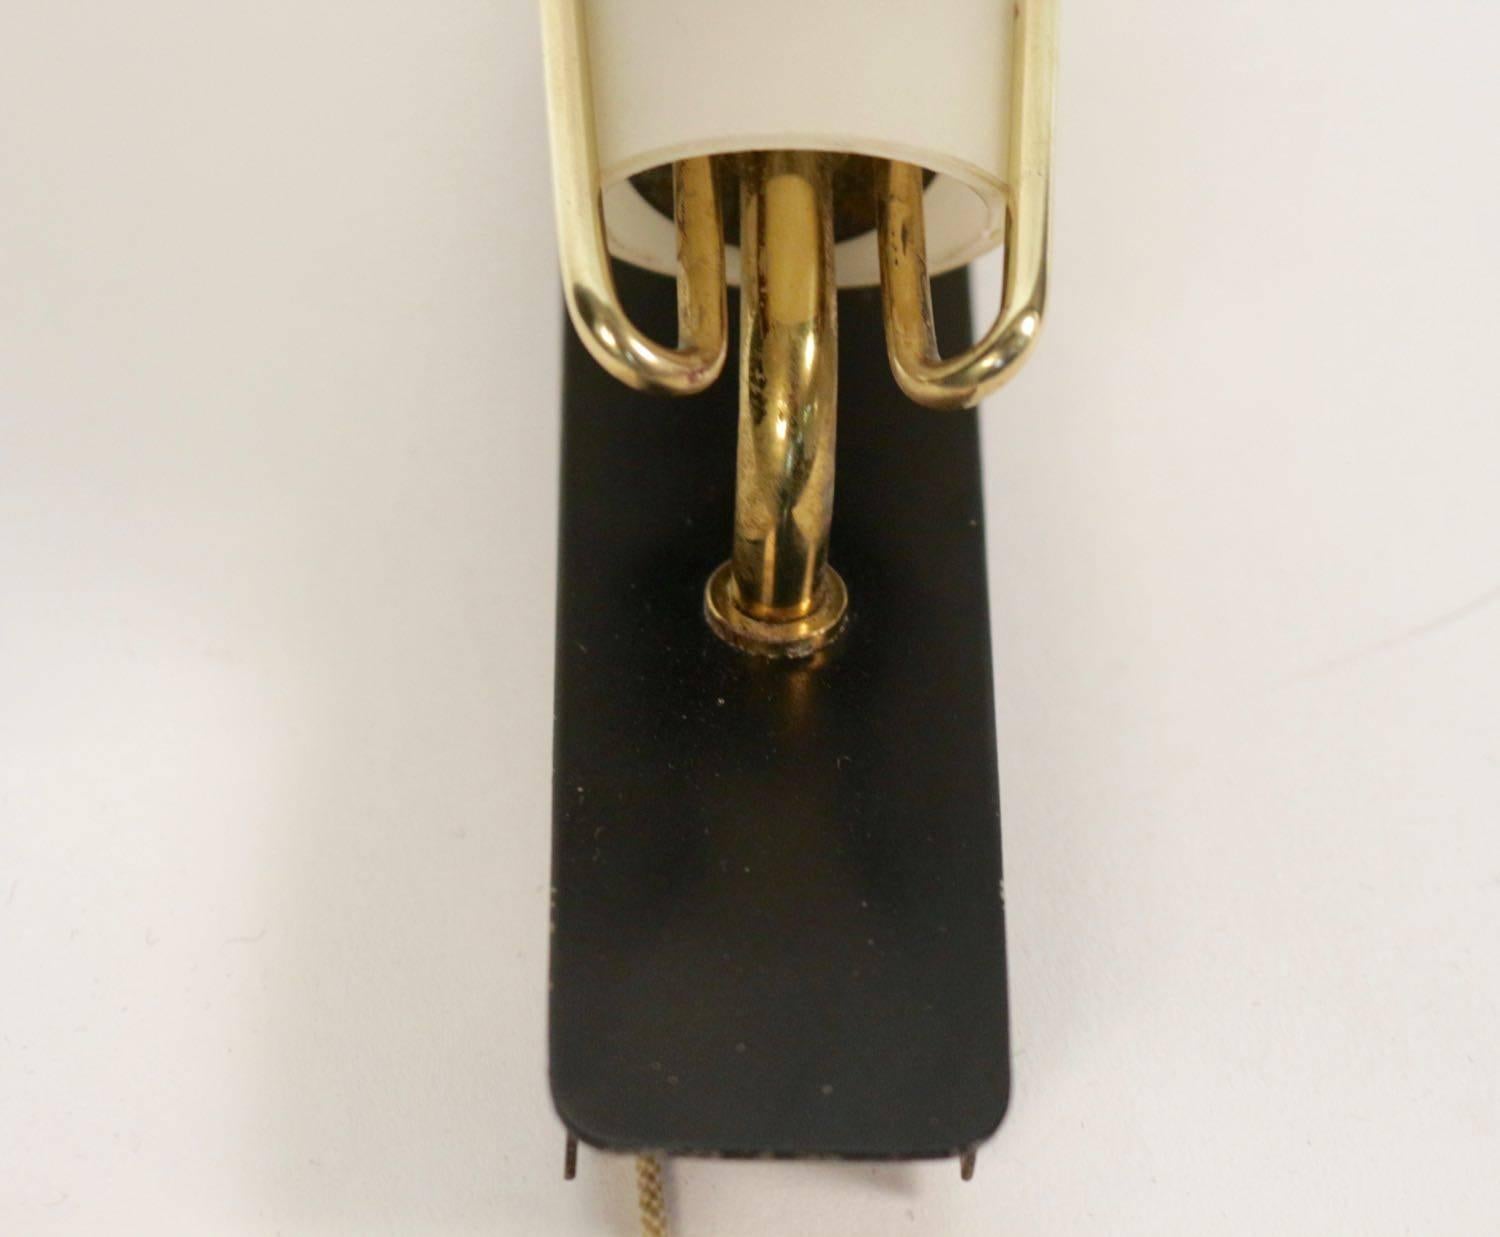 Pair of 1960s Italian sconces by Stillovo.
A black lacquered metal plate serves as a support for two brass rods in which fits a white conical shape opalin glass lampshade.
On each sconce a small cord allows to switch the light on and off.
1960s